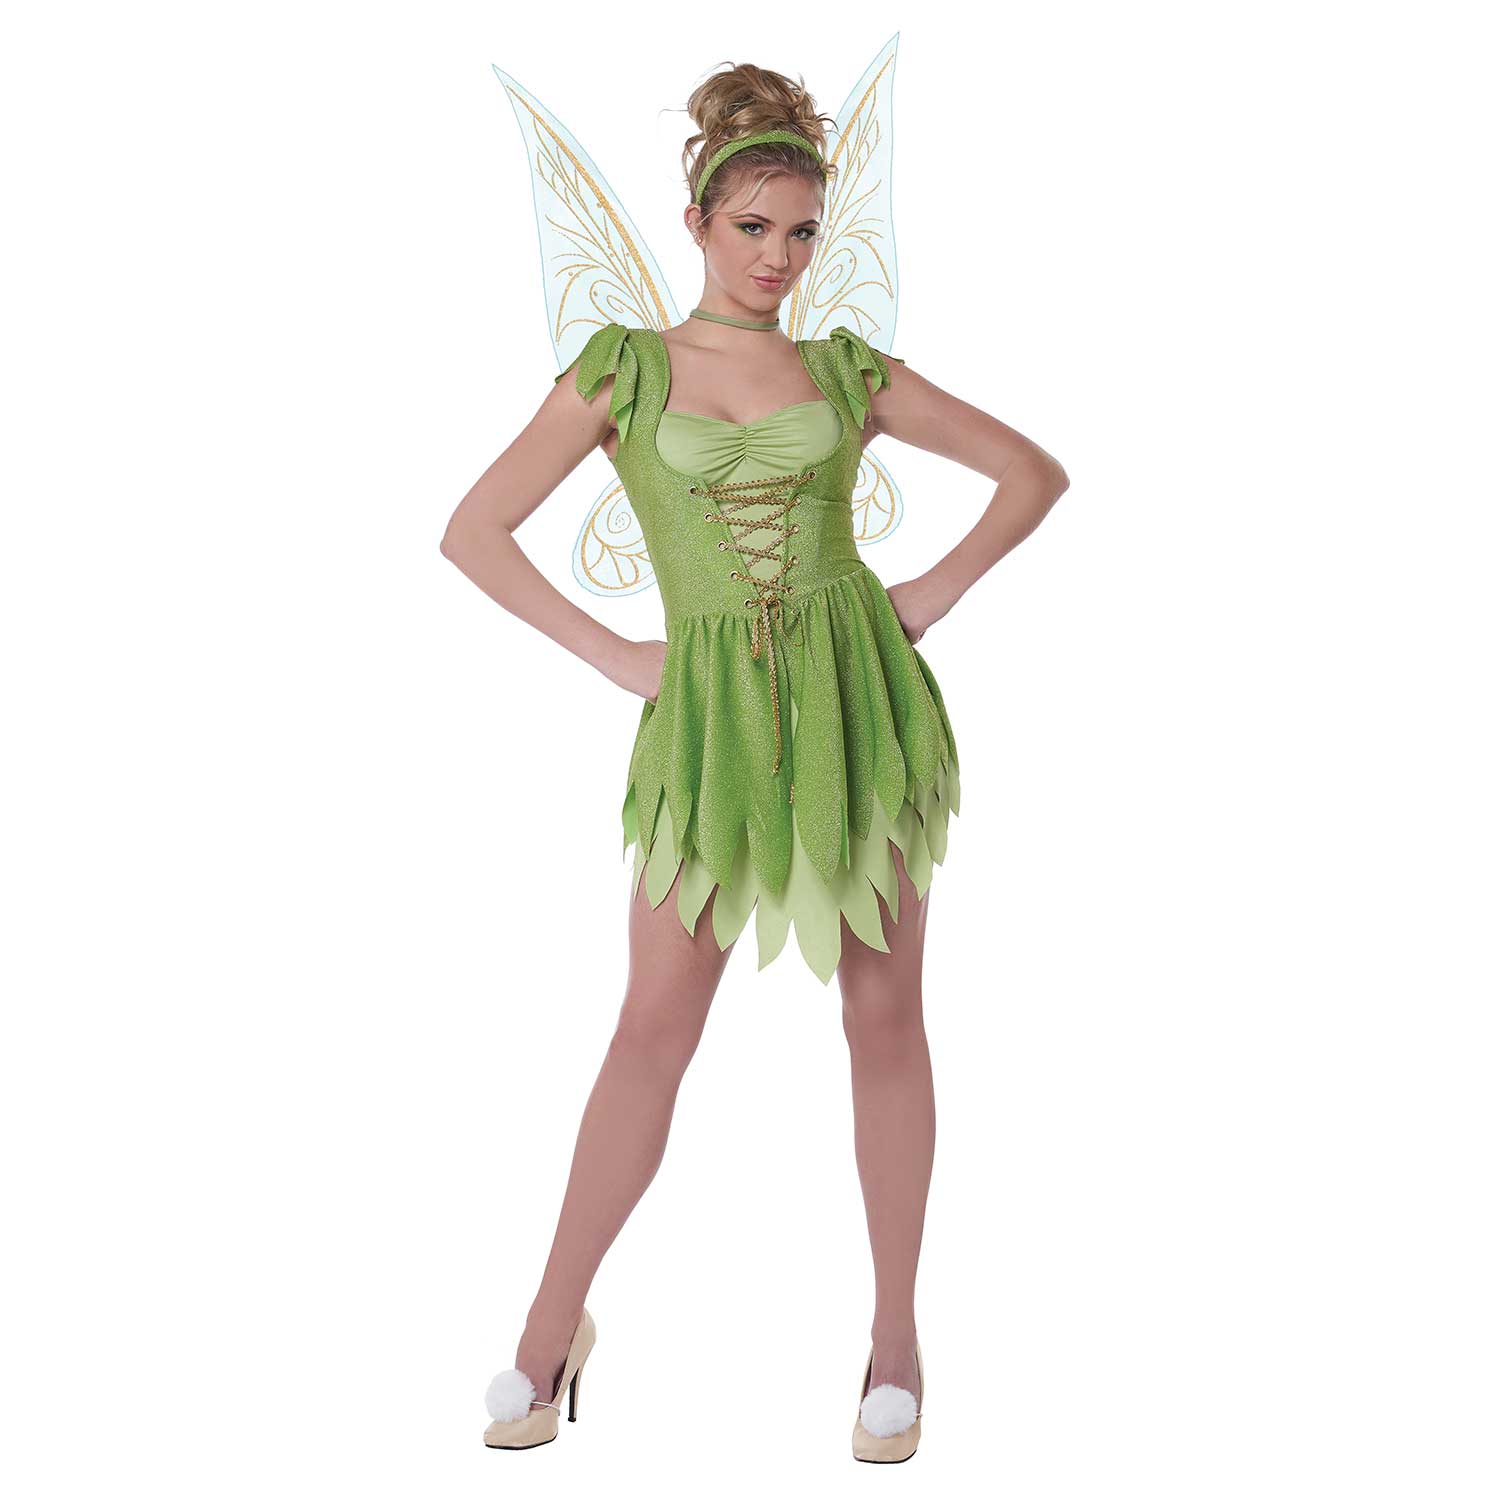 Adult Classic Fairy Tinkerbell Womens Costume Large size 10-12 - image 1 of 2